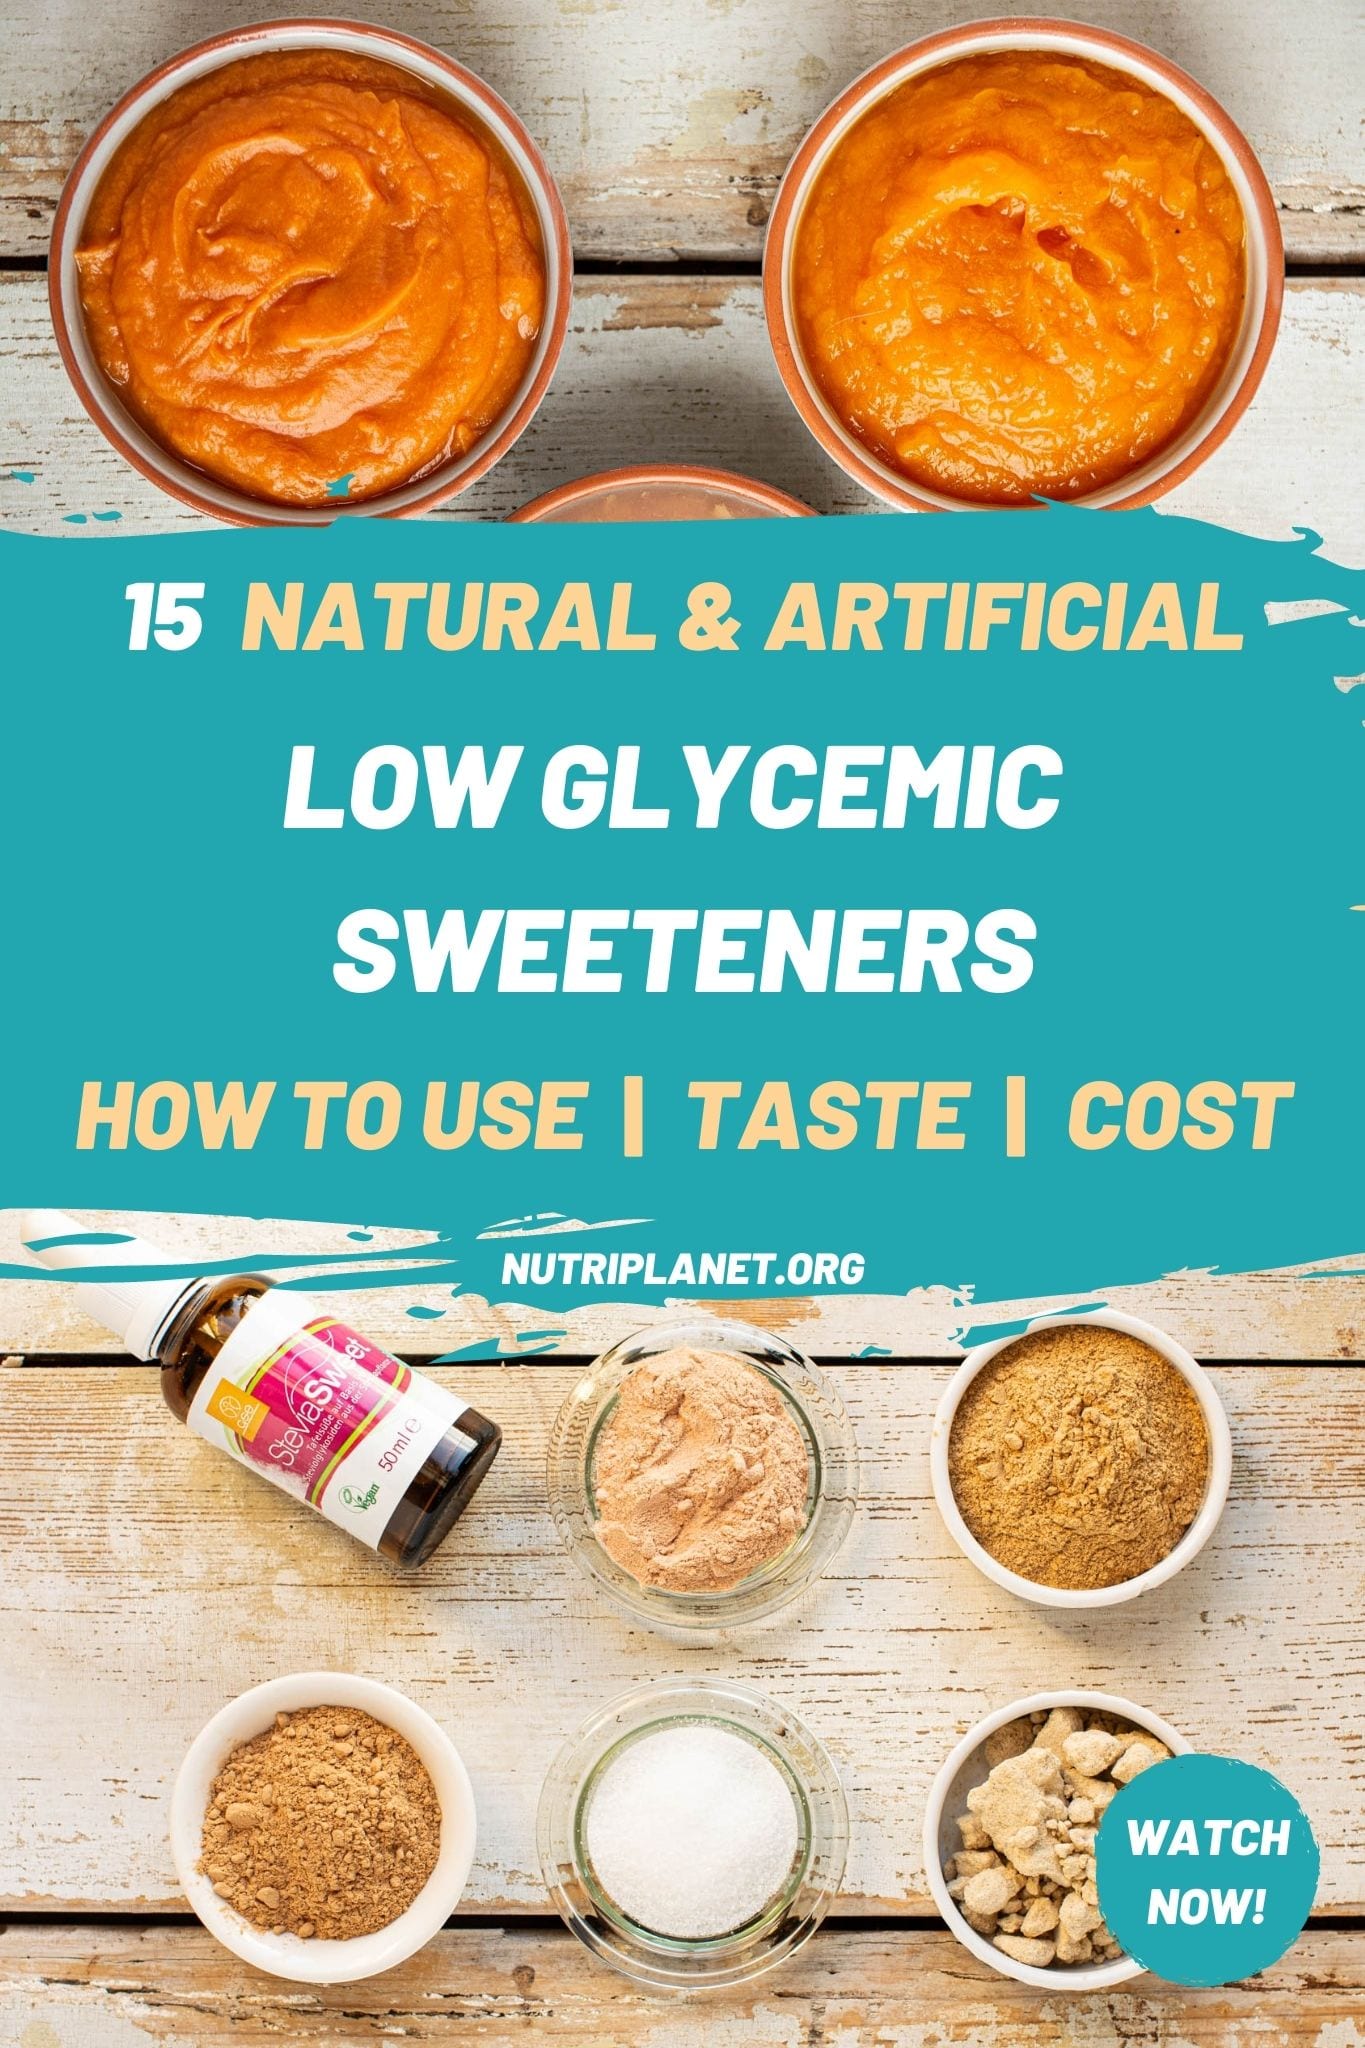 Natural and artificial low glycemic sweeteners